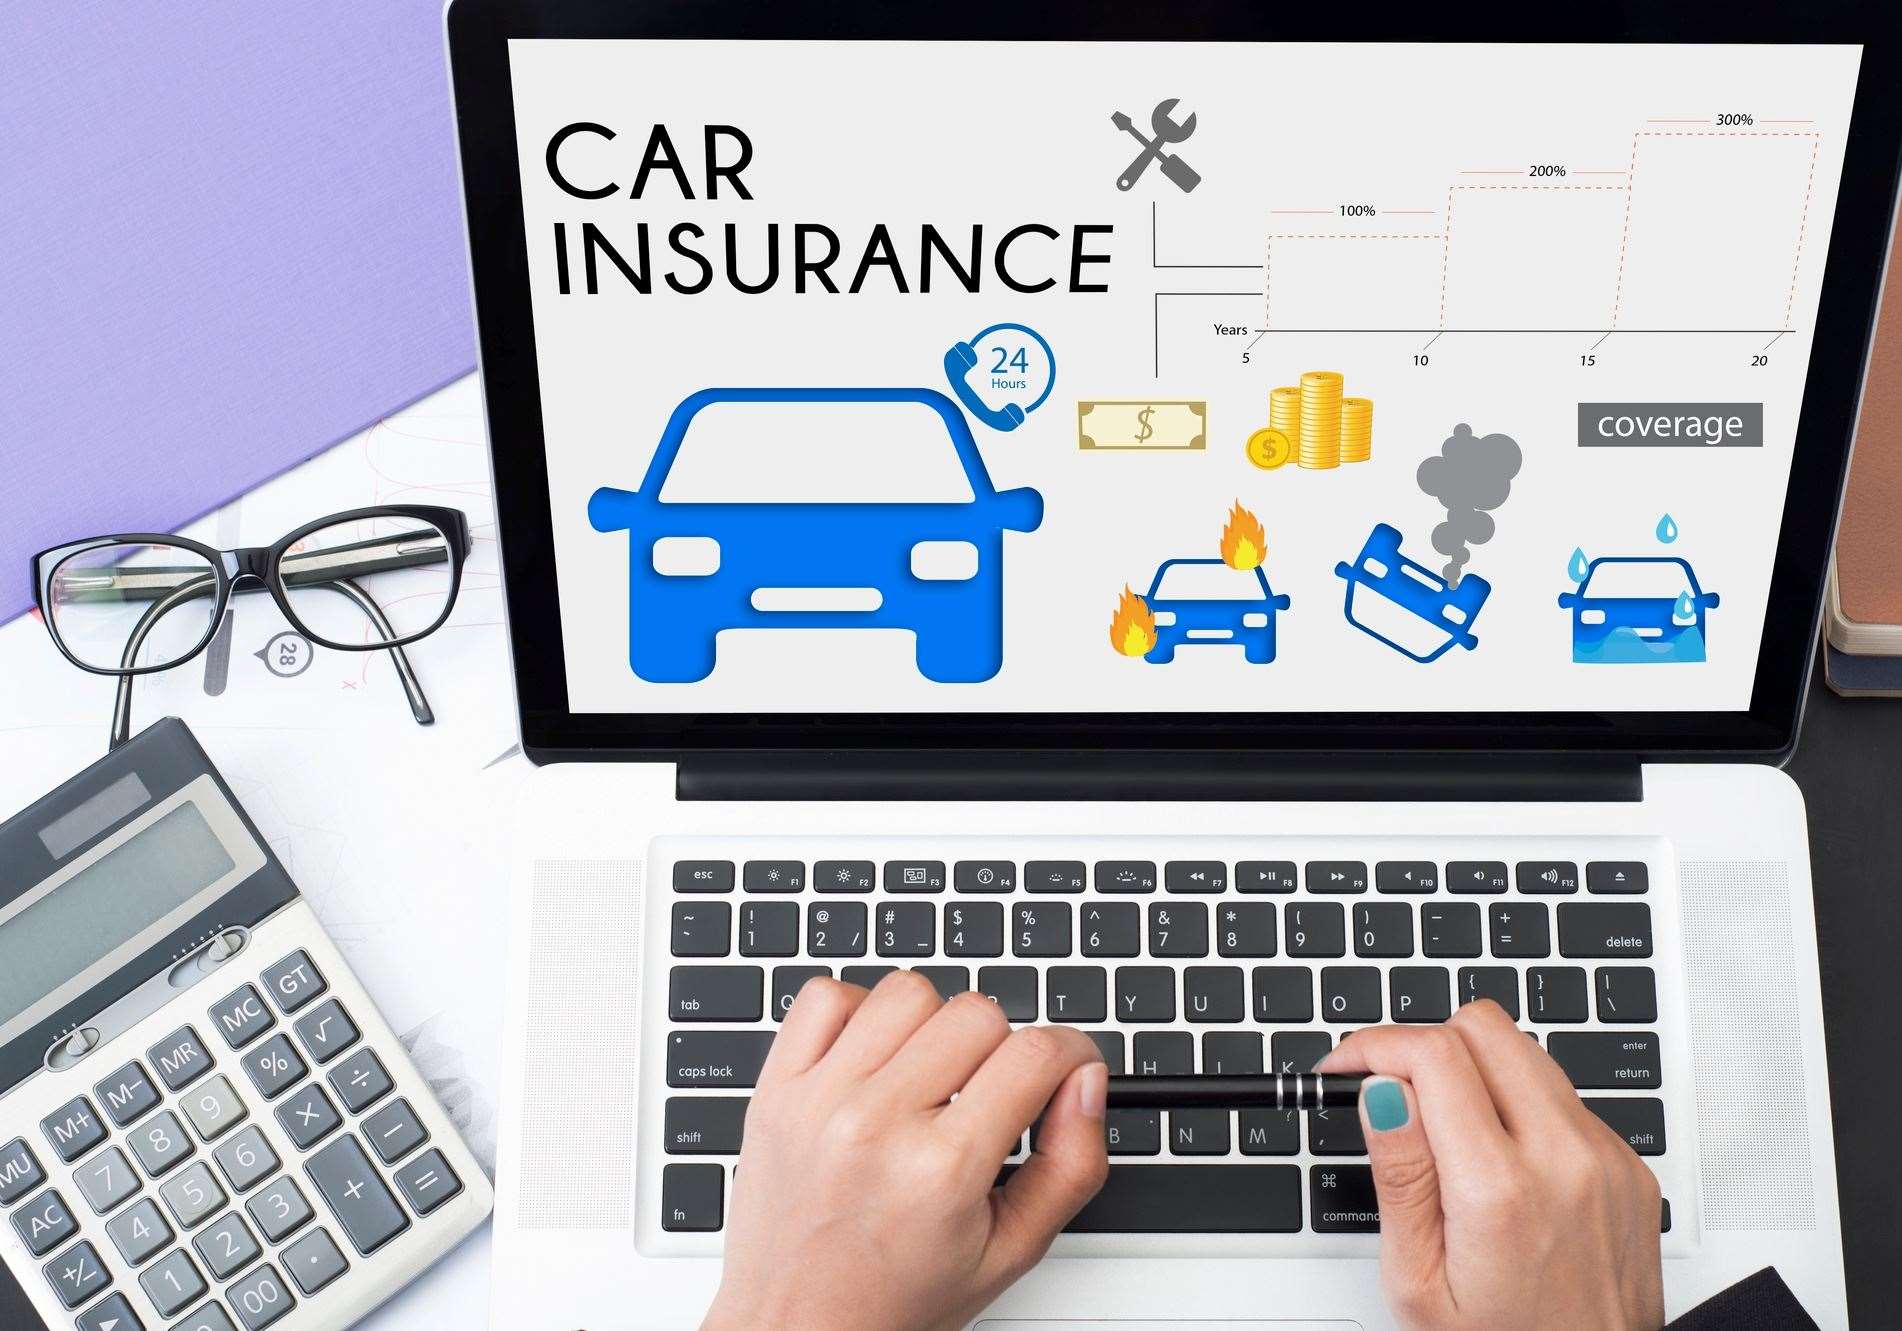 Car insurance quotes are rocketing...for young and old alike